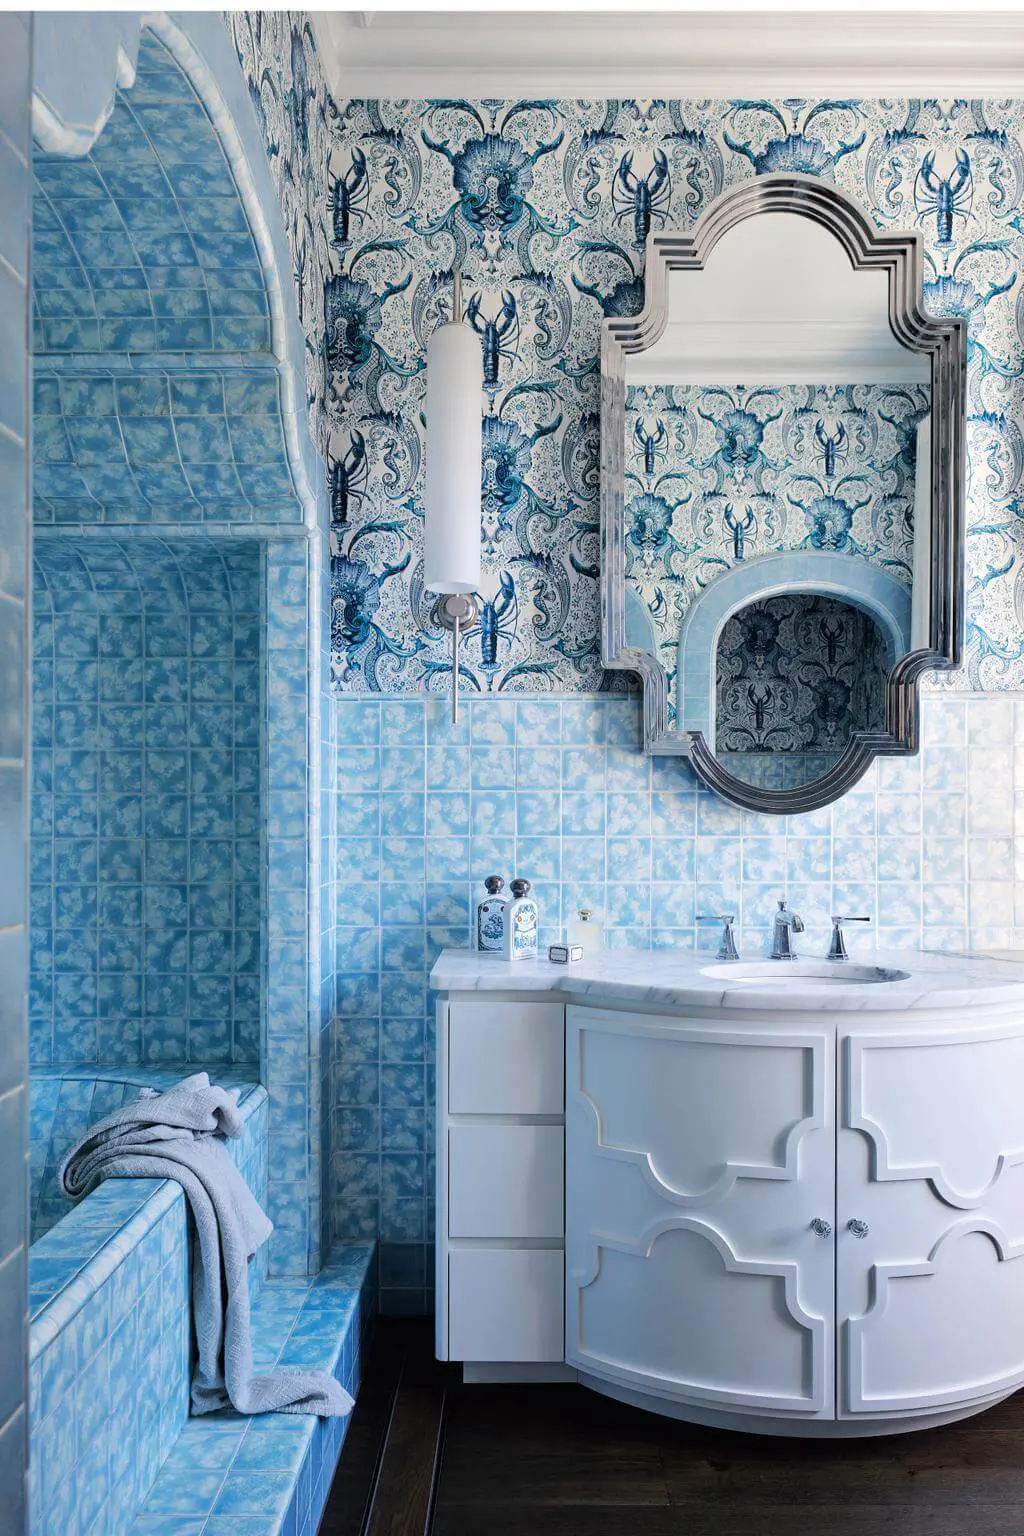 Moorish-style blue and white tiles in the bathroom